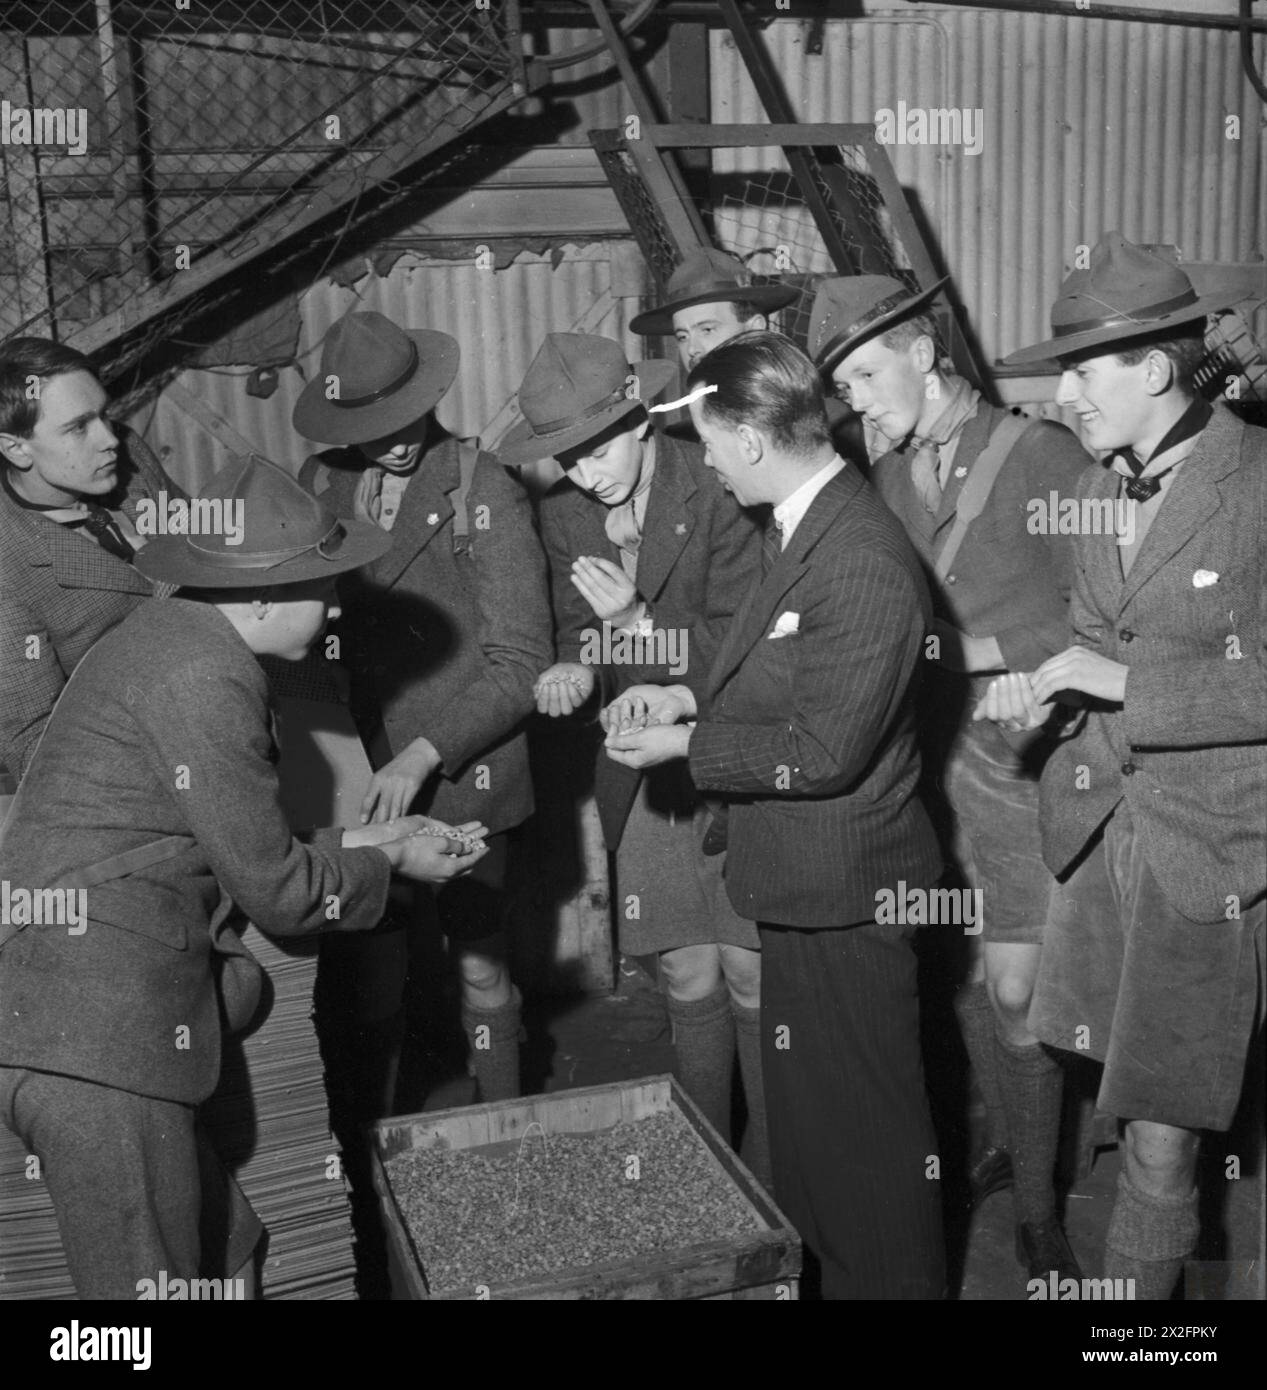 SALVAGE IN WARTIME BRITAIN: BOY SCOUTS VISIT A PAPER MILL, UK, 1943 - A group of Boy Scouts from Eton College are shown cartridge wads during their visit to a paper mill, somewhere in Britain. Members of the Boy Scout Movement played a huge part in the paper salvage campaigns across the country during the War Stock Photo